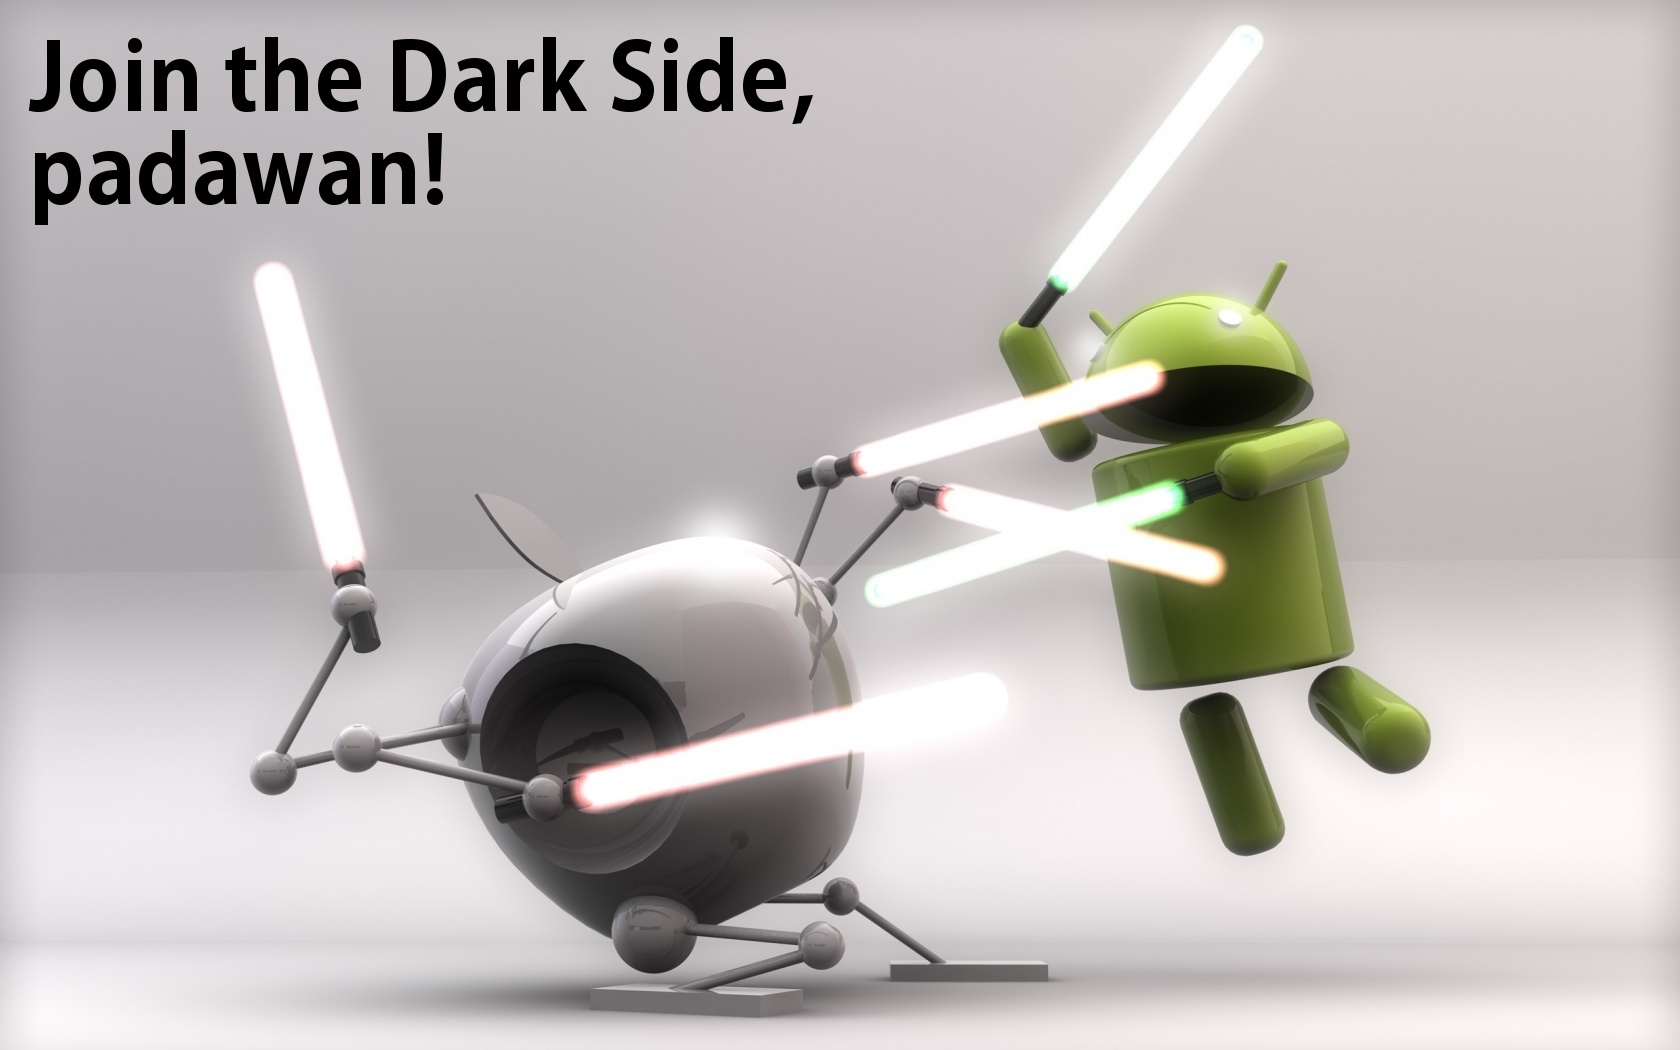 apple-vs-android-join_the_dark_side-1680x1050.jpg